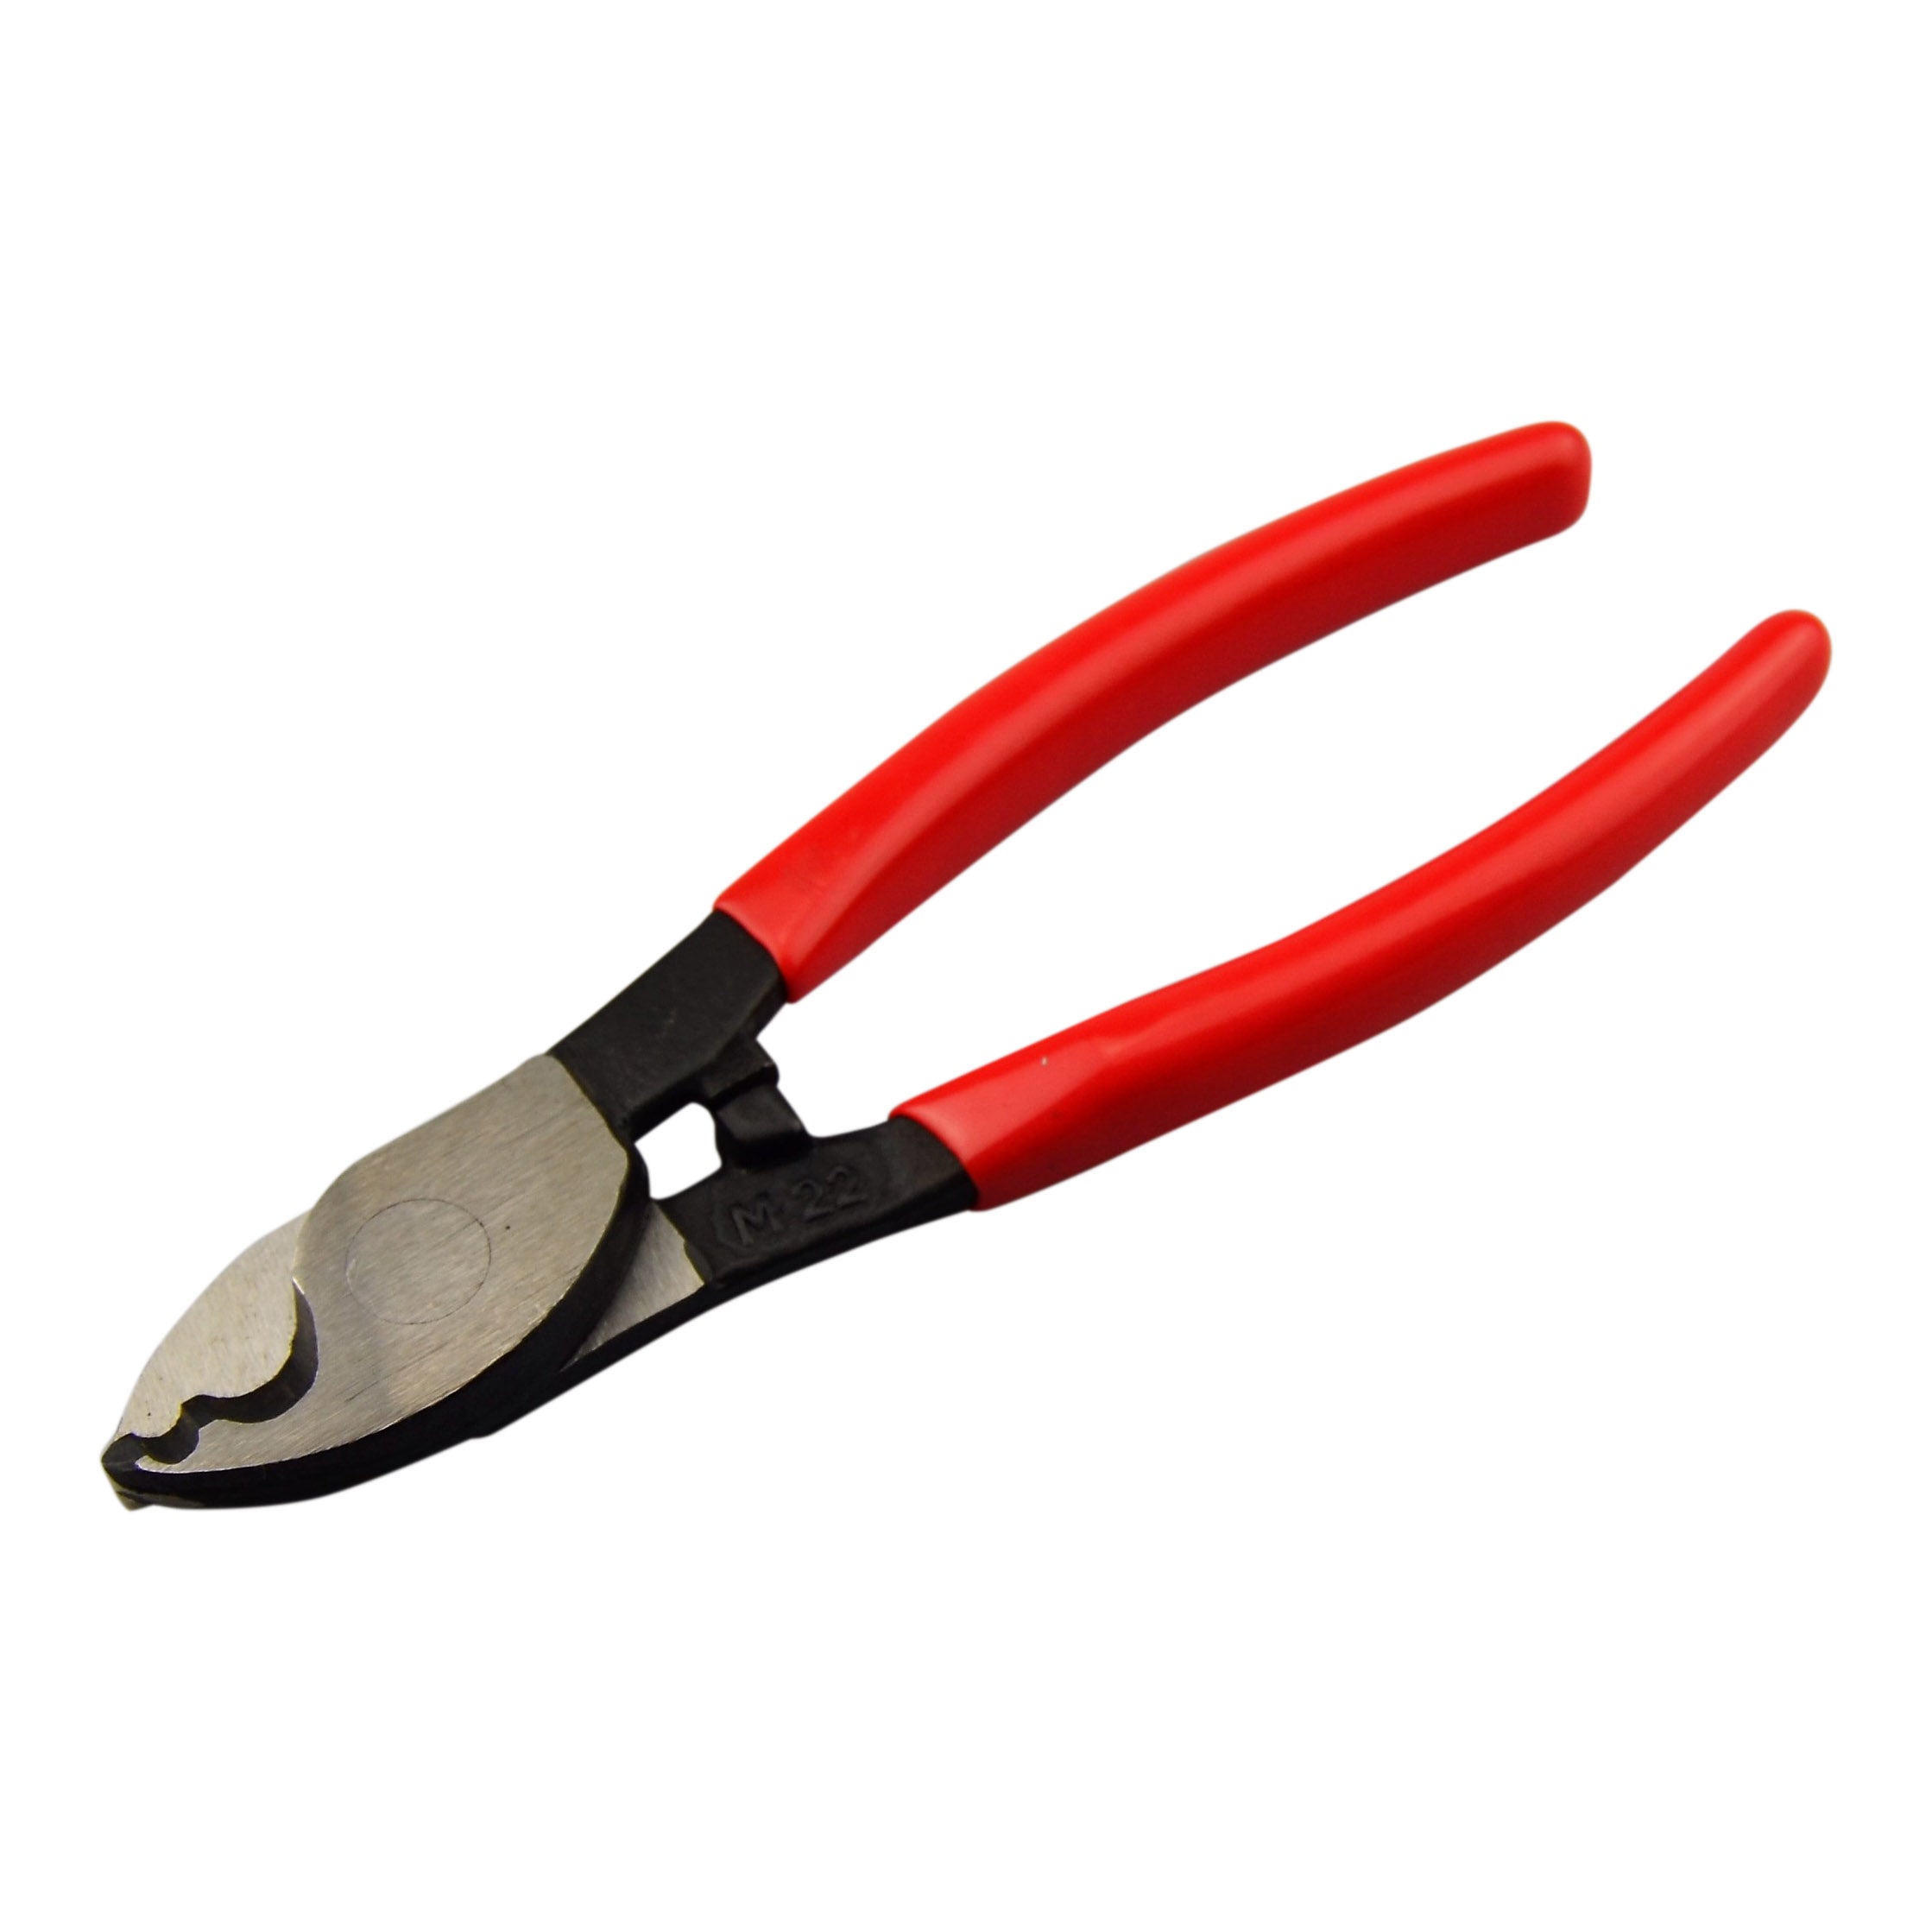 Cable Cutter for Cables up to 22mm²